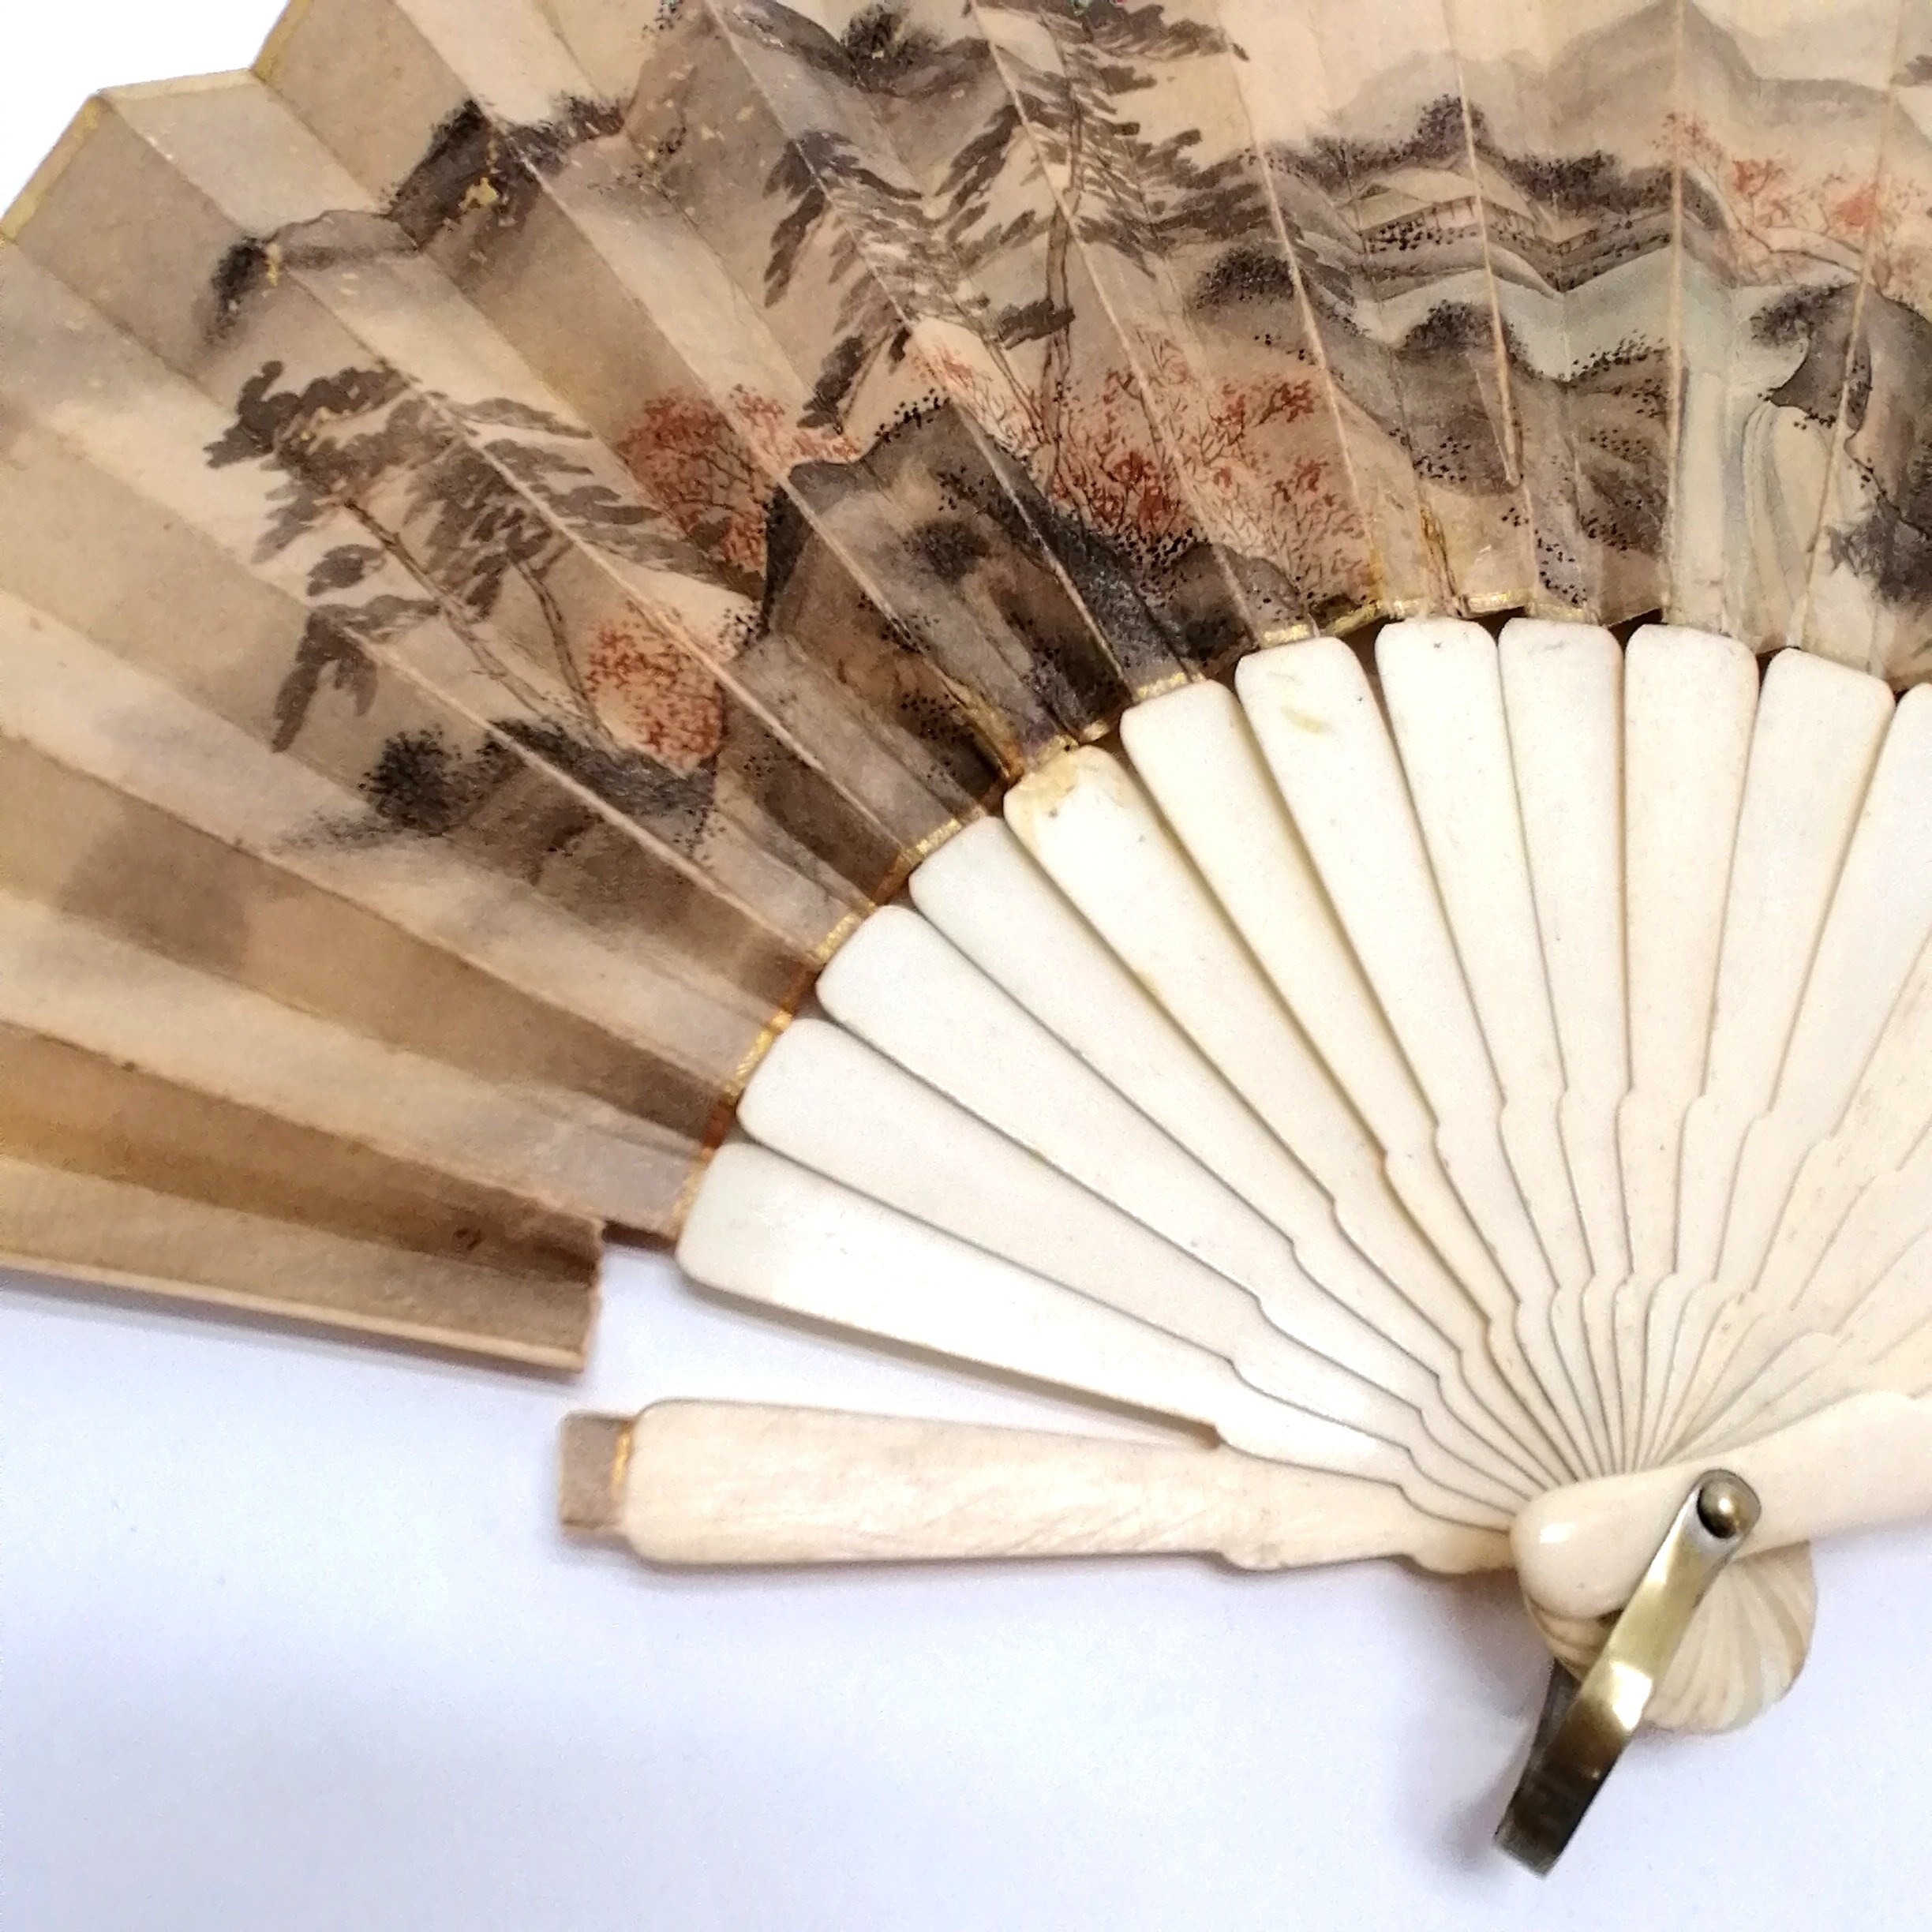 Antique Chinese hand decorated fan with antique ivory sticks (1 a/f) - 48cm across (opened) - Image 3 of 3